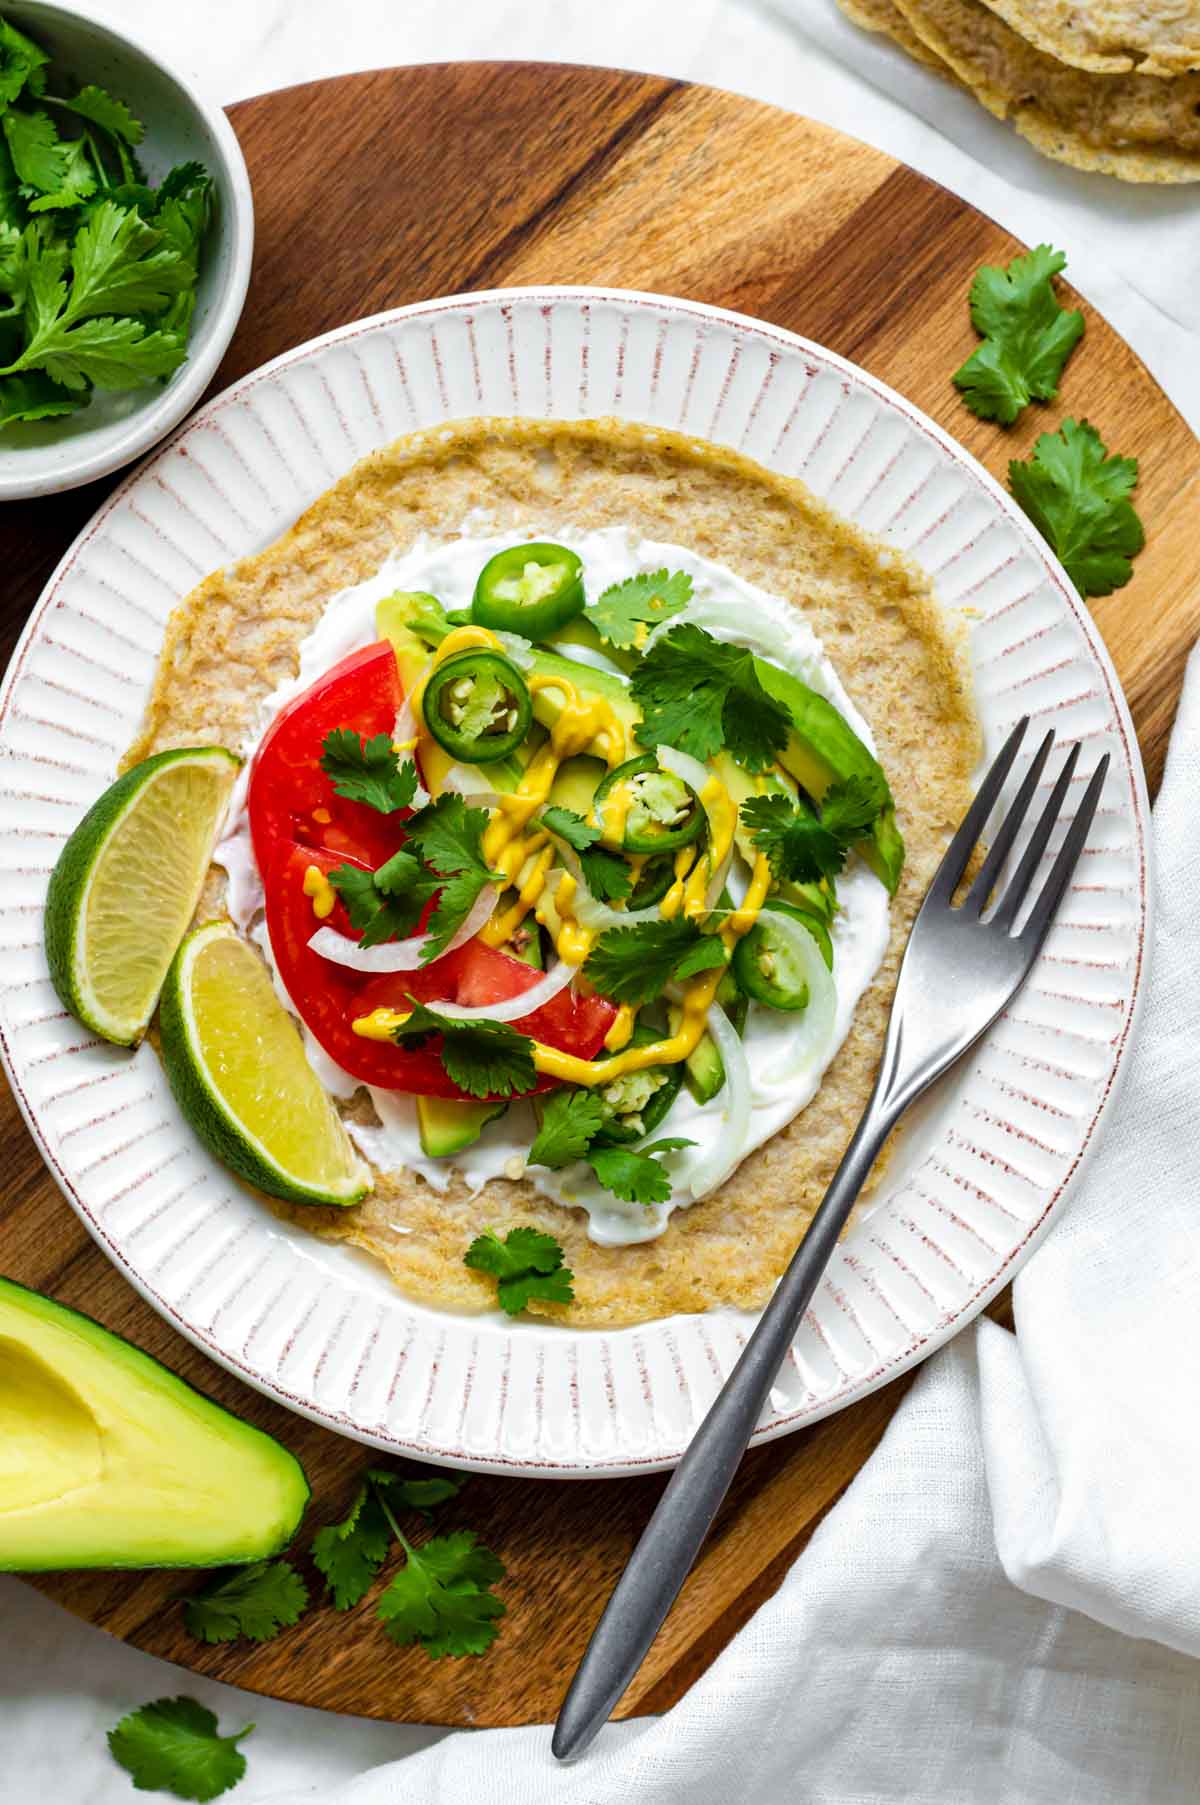 Oat tortilla served on a white plate and filled with vegan mayo, avocado, tomatoes and cilantro.